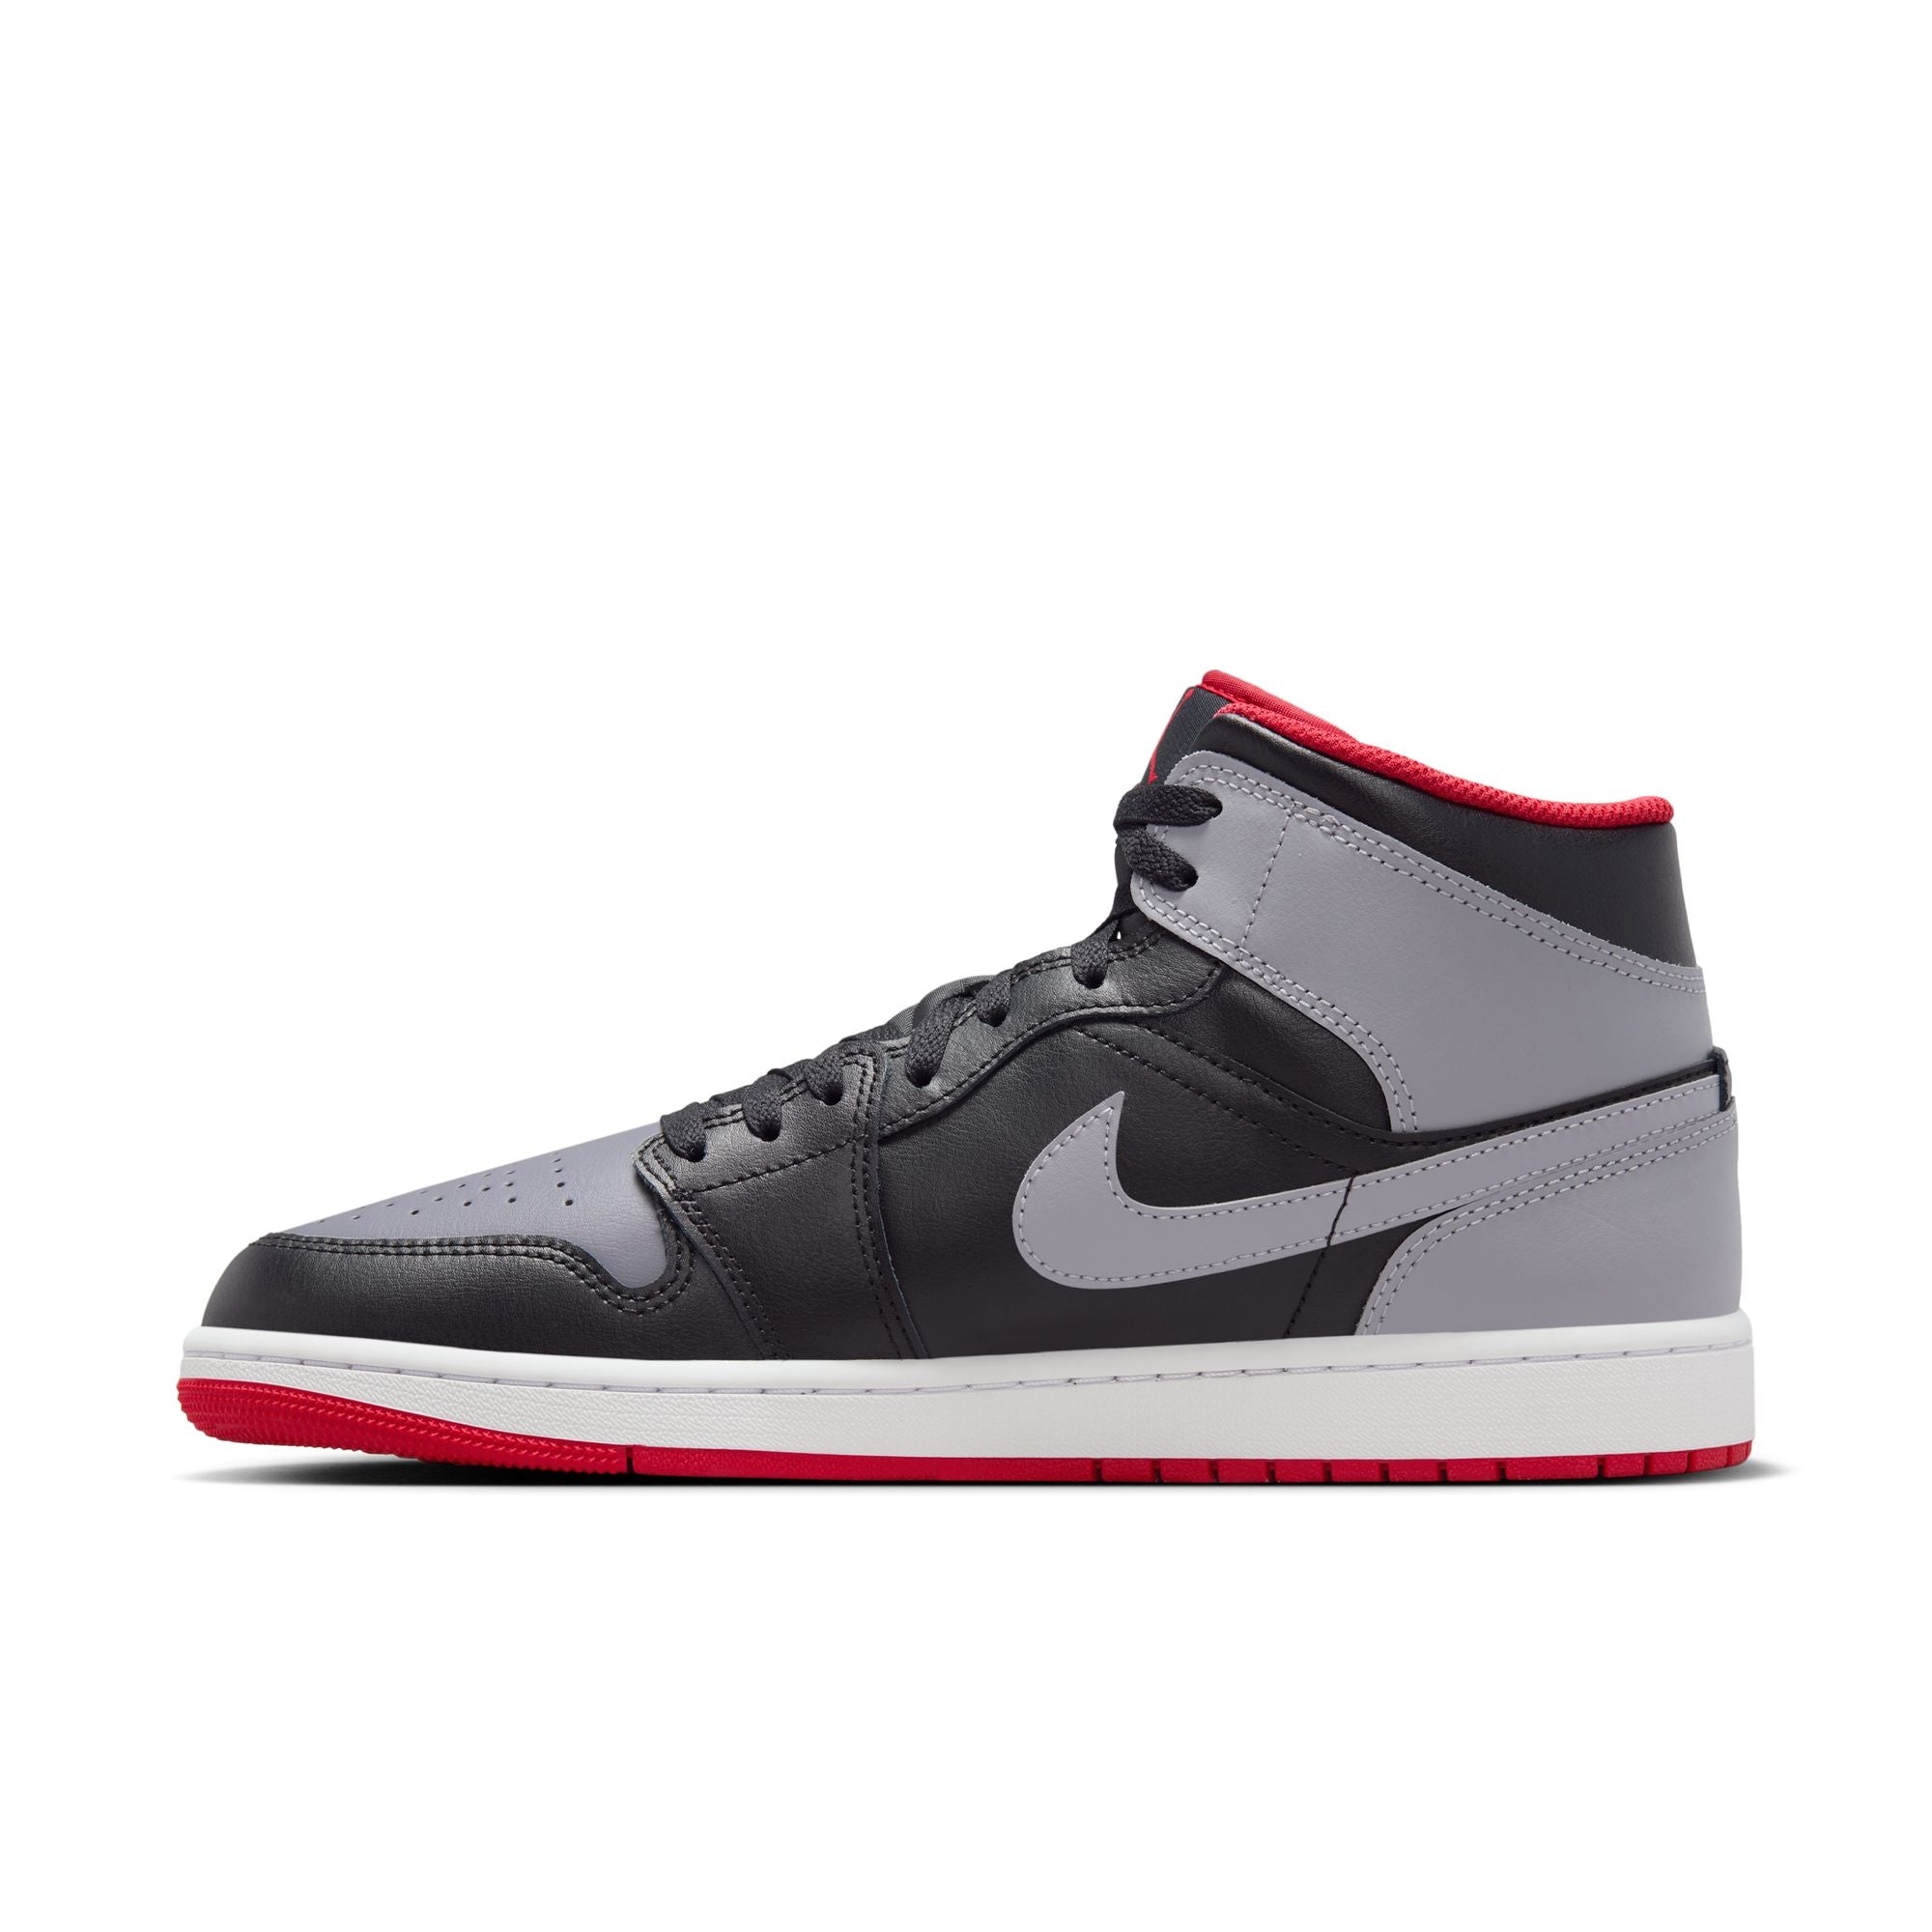 NIKE - Air Jordan 1 Mid - (Black/Cement Grey-Fire Red-Whi) view 4